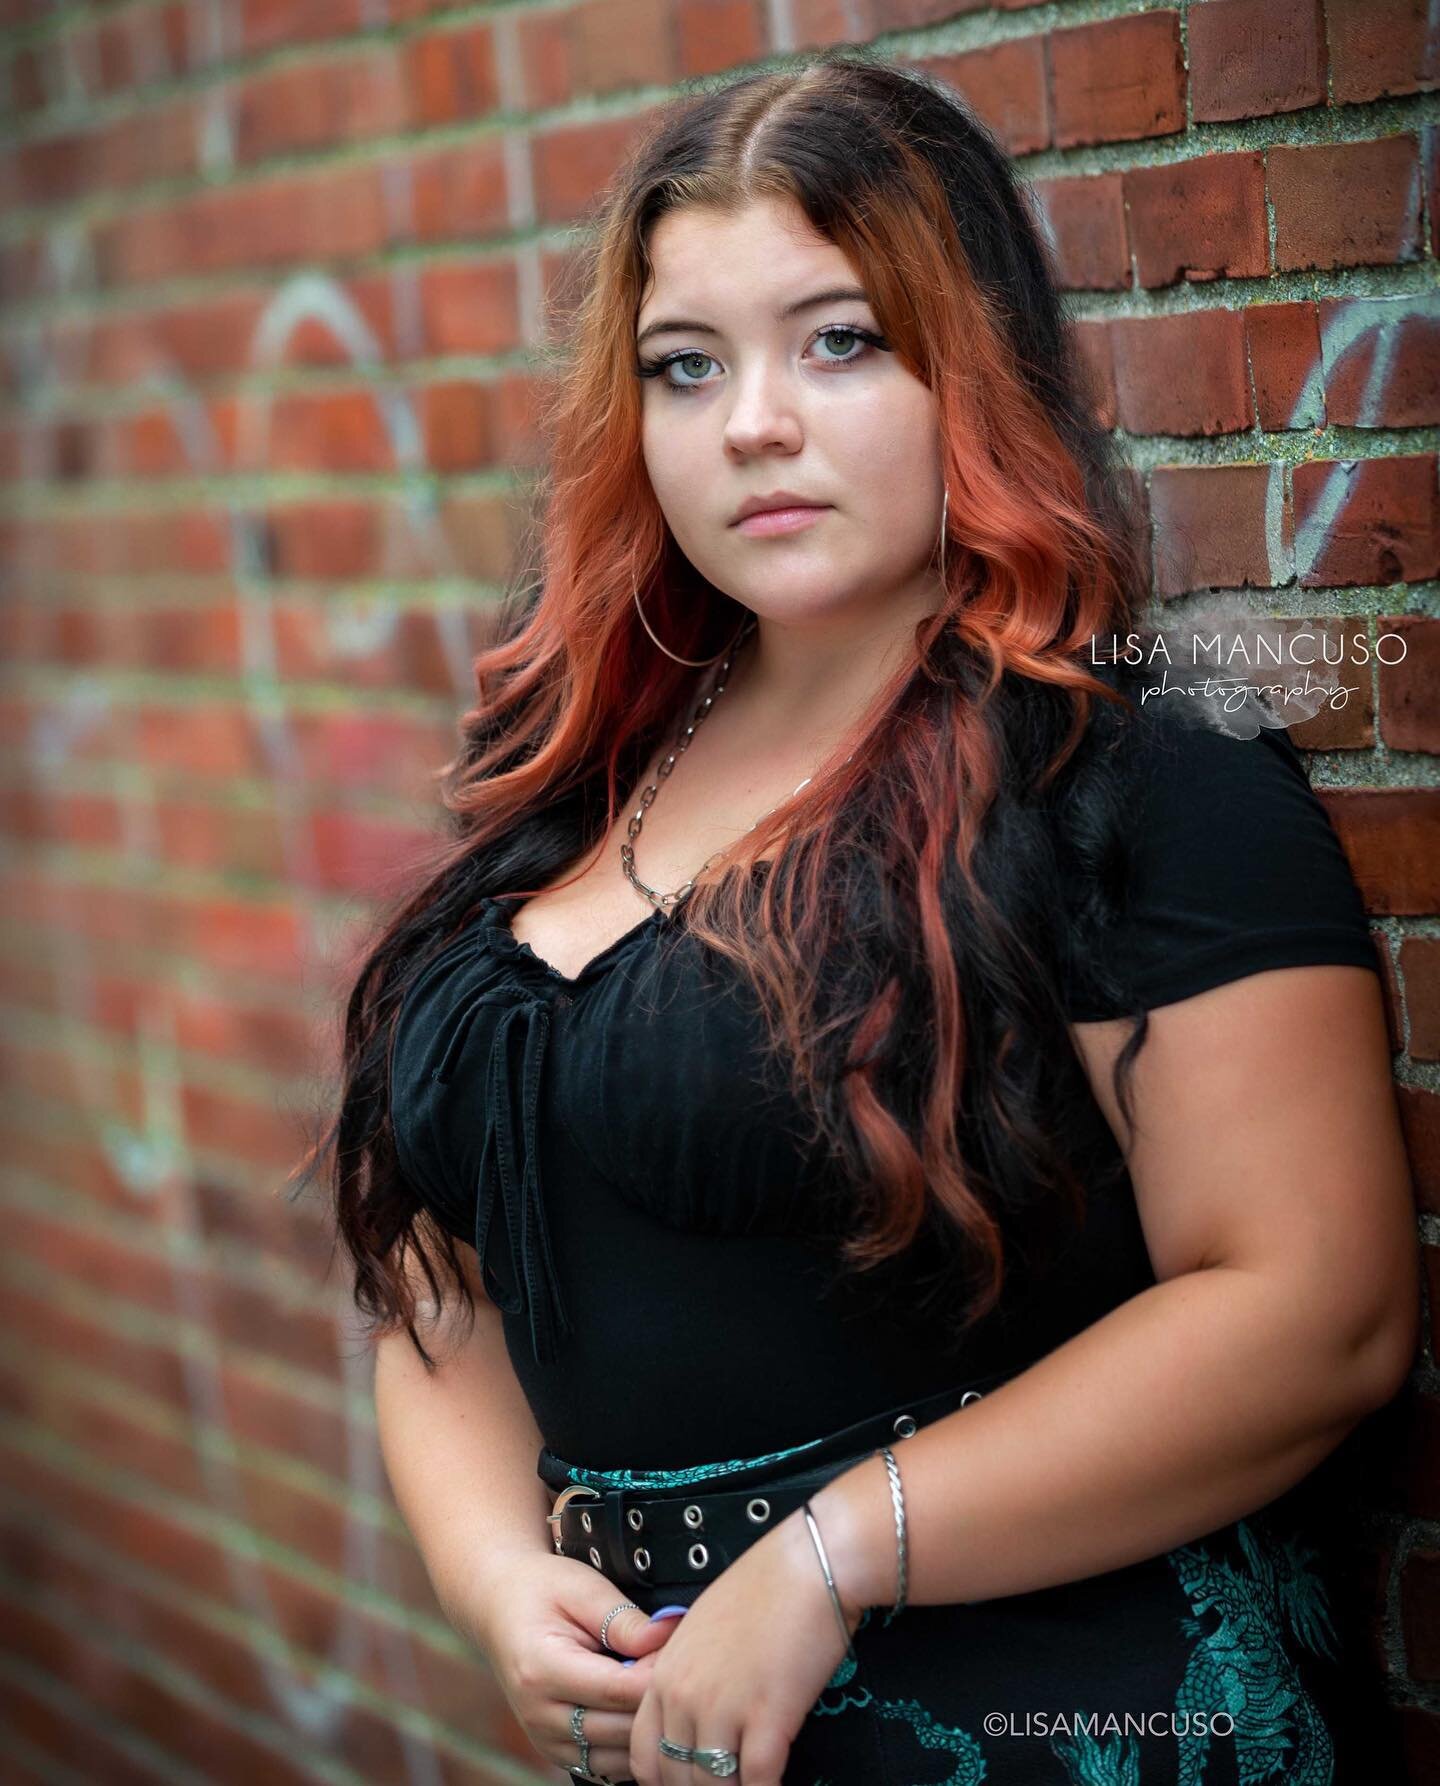 Brooke rocked her urban senior session yesterday! We had so much fun strolling around Salem and discovering different areas for her shoot! Great job Brooke! #lisamancusophotography #lisamancusophotographyseniors #urbanseniorsession #maseniorphotograp